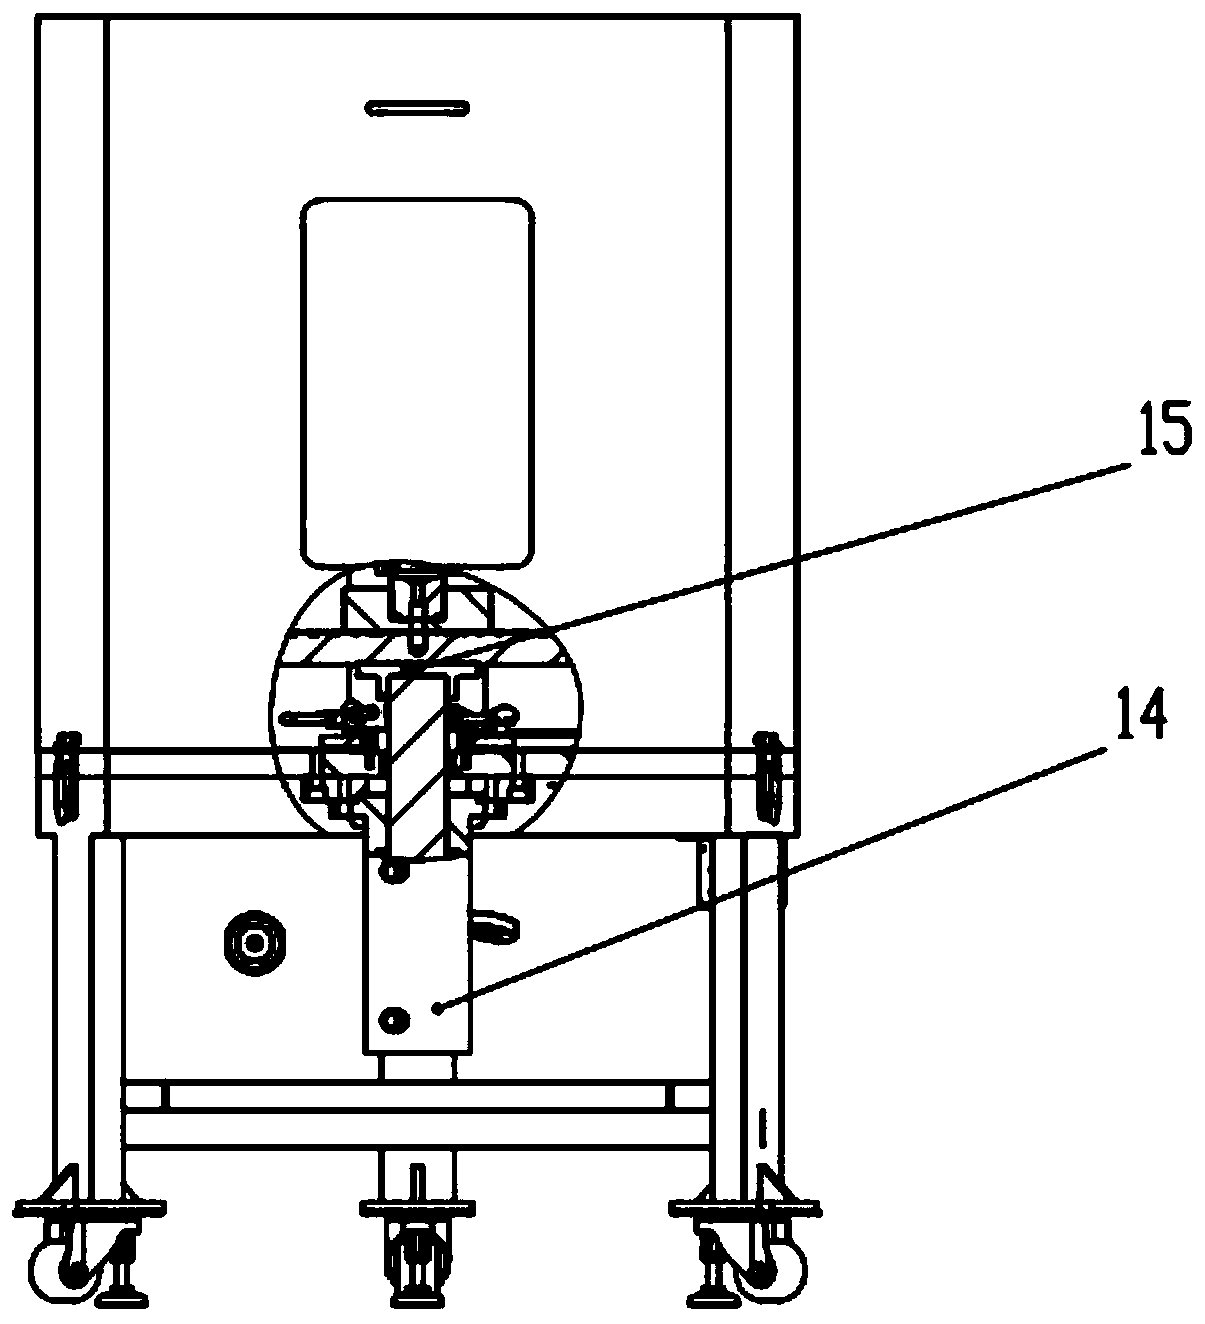 Clamping mechanism for inspecting safety valve